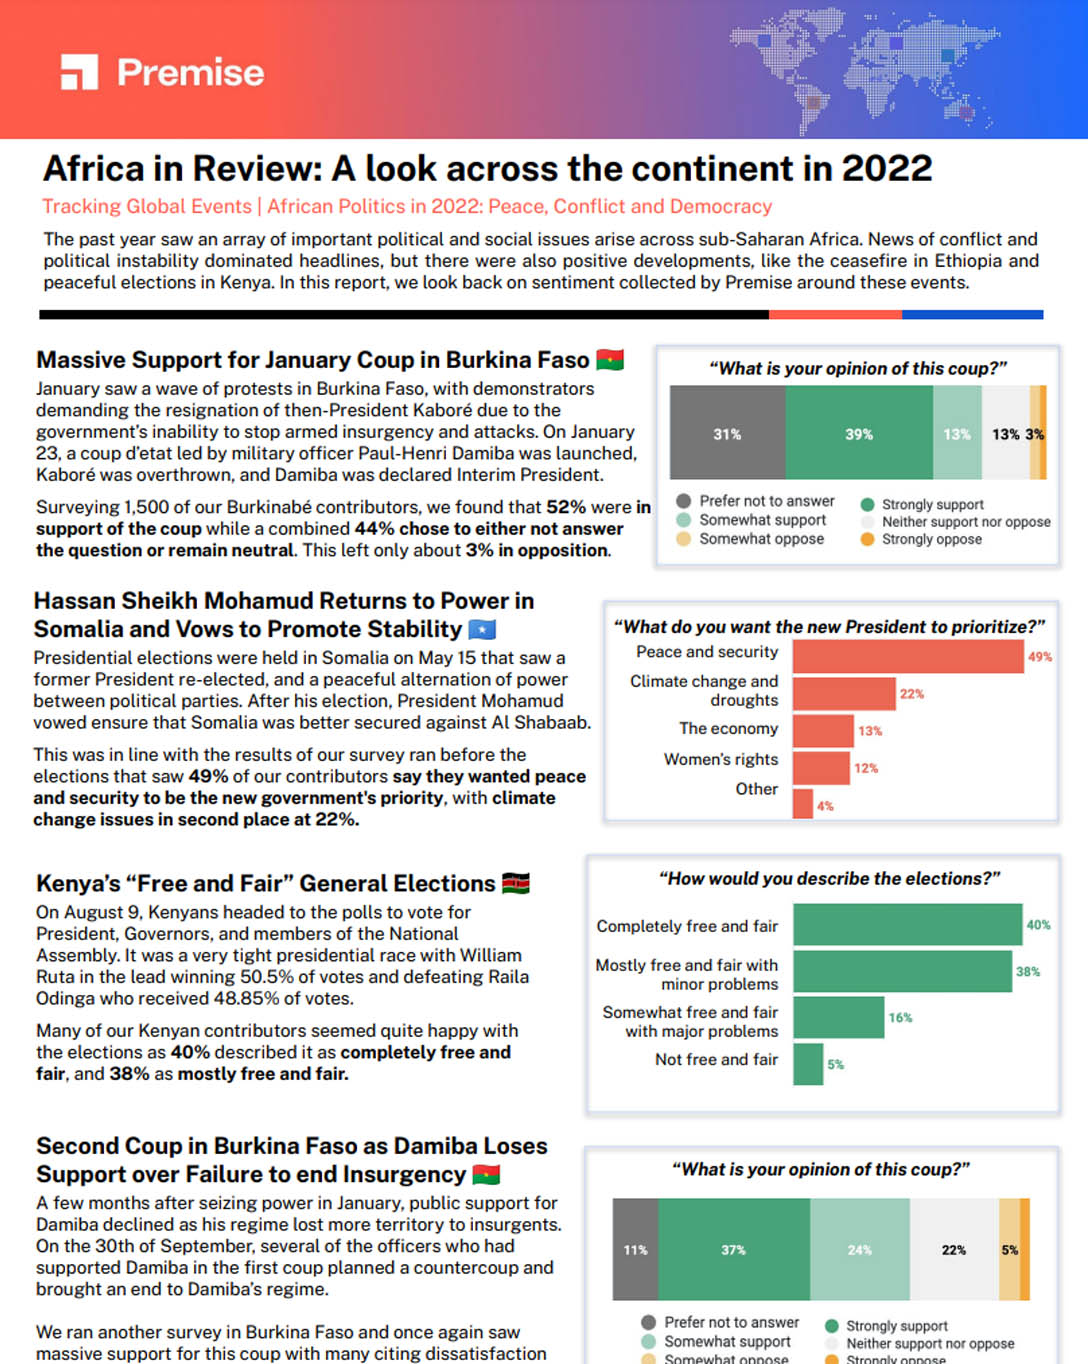 Africa in Review: A look across the continent in 2022